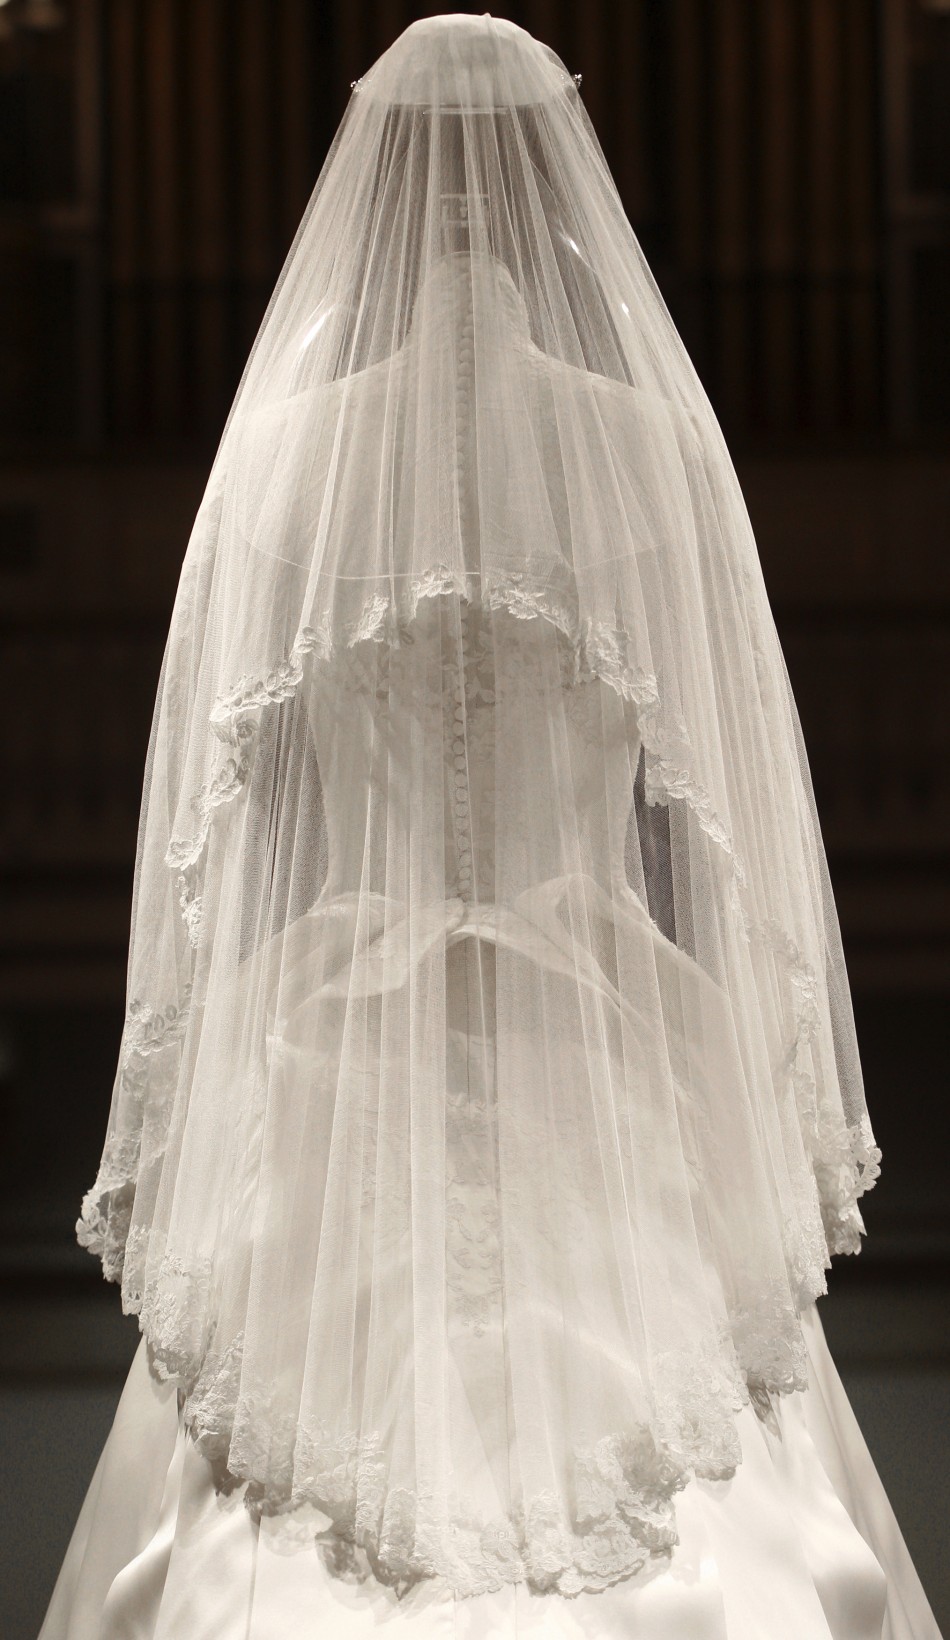 The wedding dress of Britain039s Catherine, Duchess of Cambridge is seen as it is prepared for display at Buckingham Palace in London